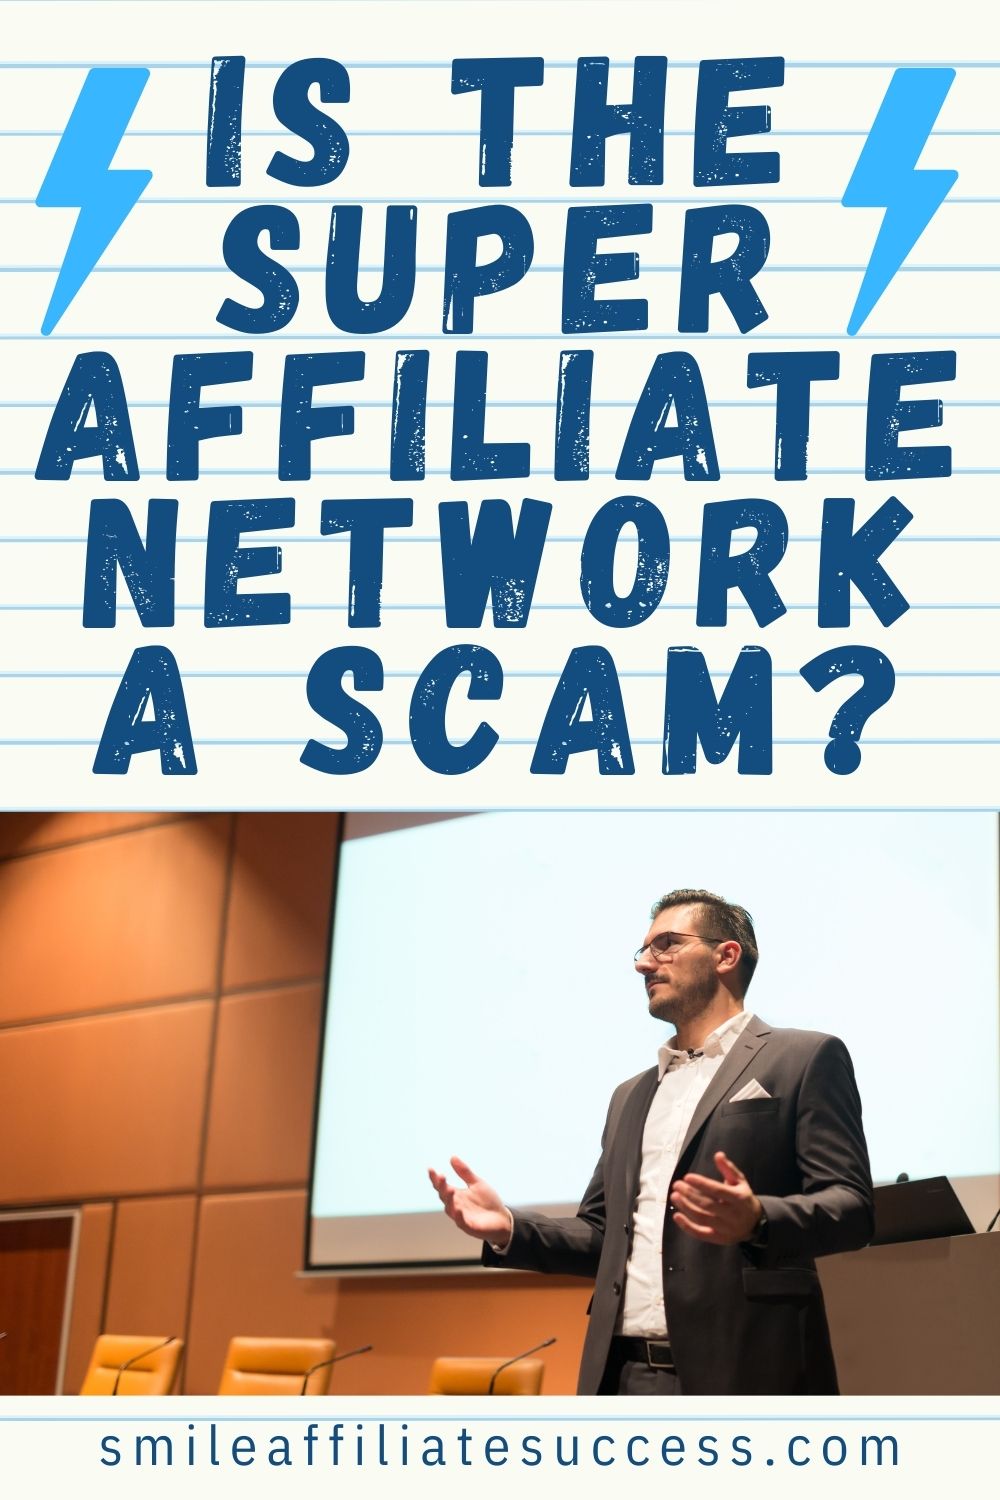 Is The Super Affiliate Network A Scam?